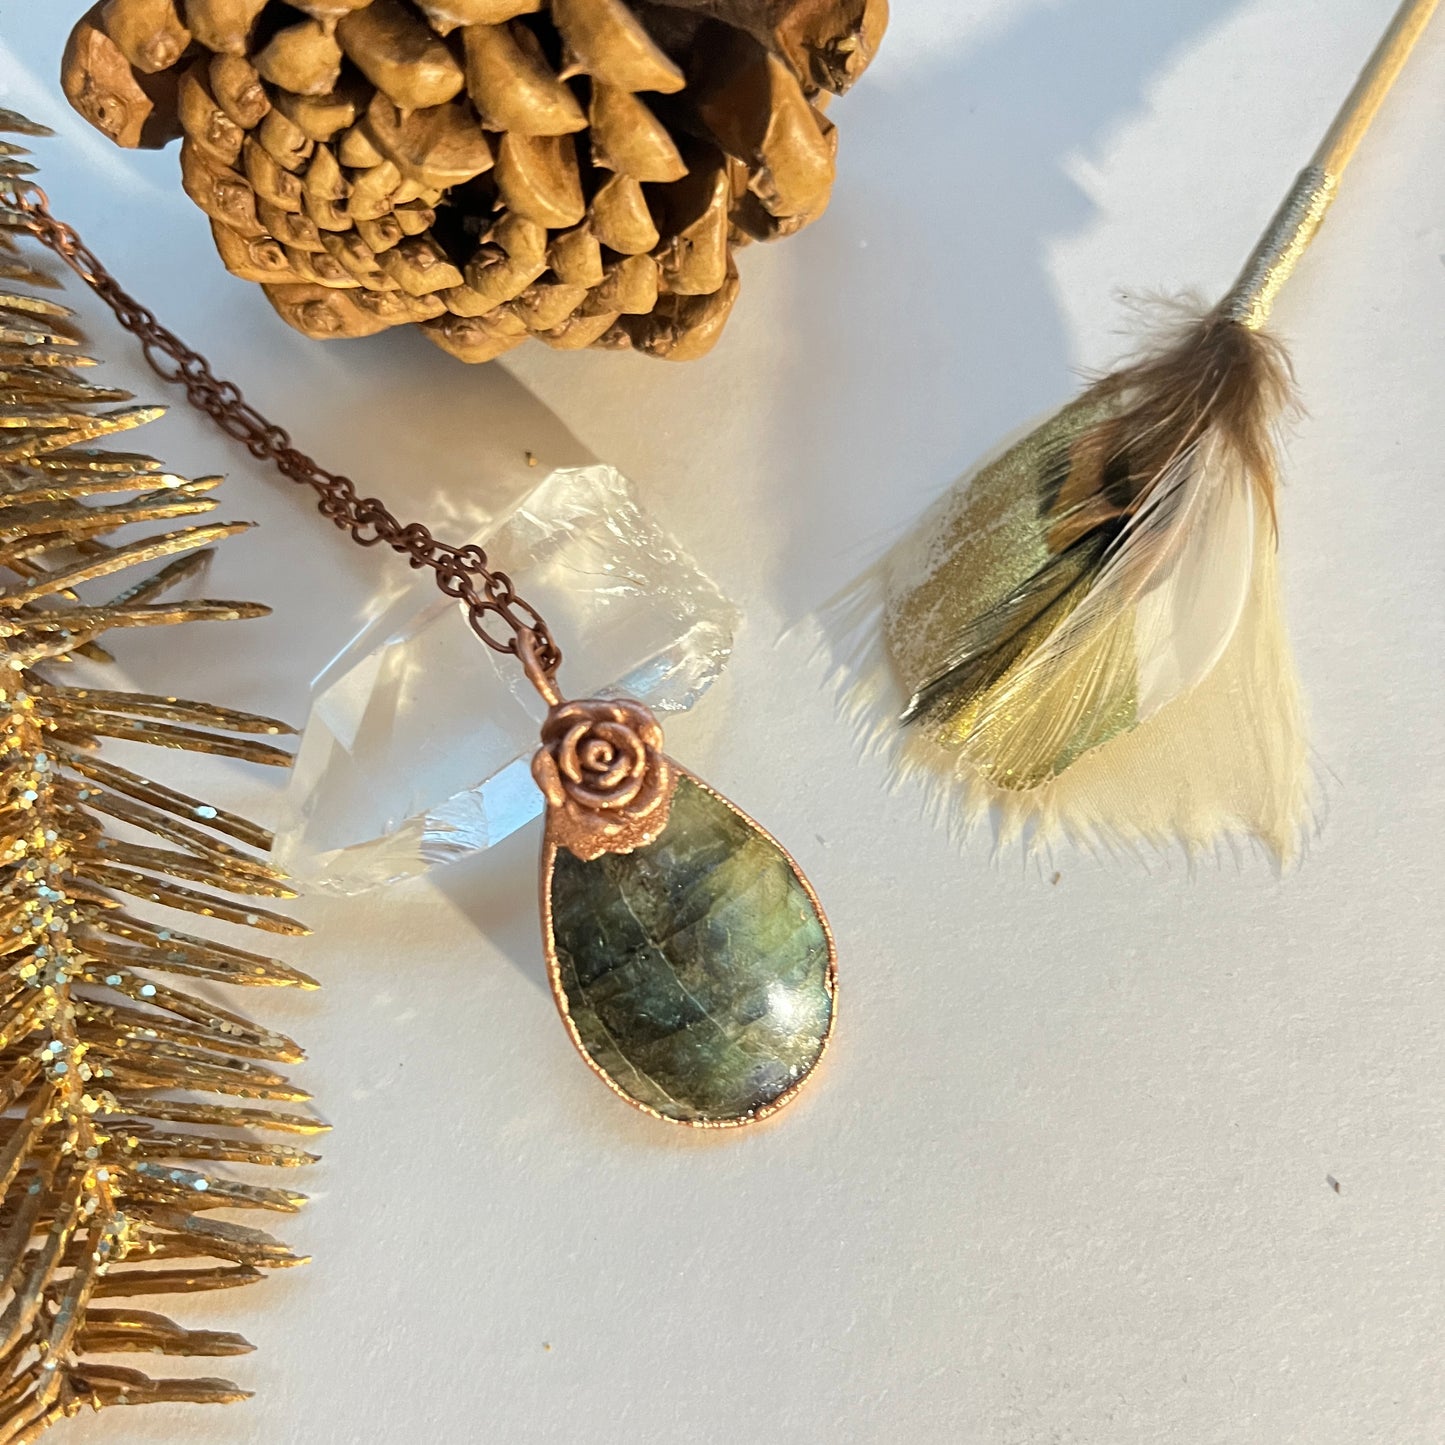 Handmade crystal jewelry, labradorite electroformed pendant on copper chain necklace. 